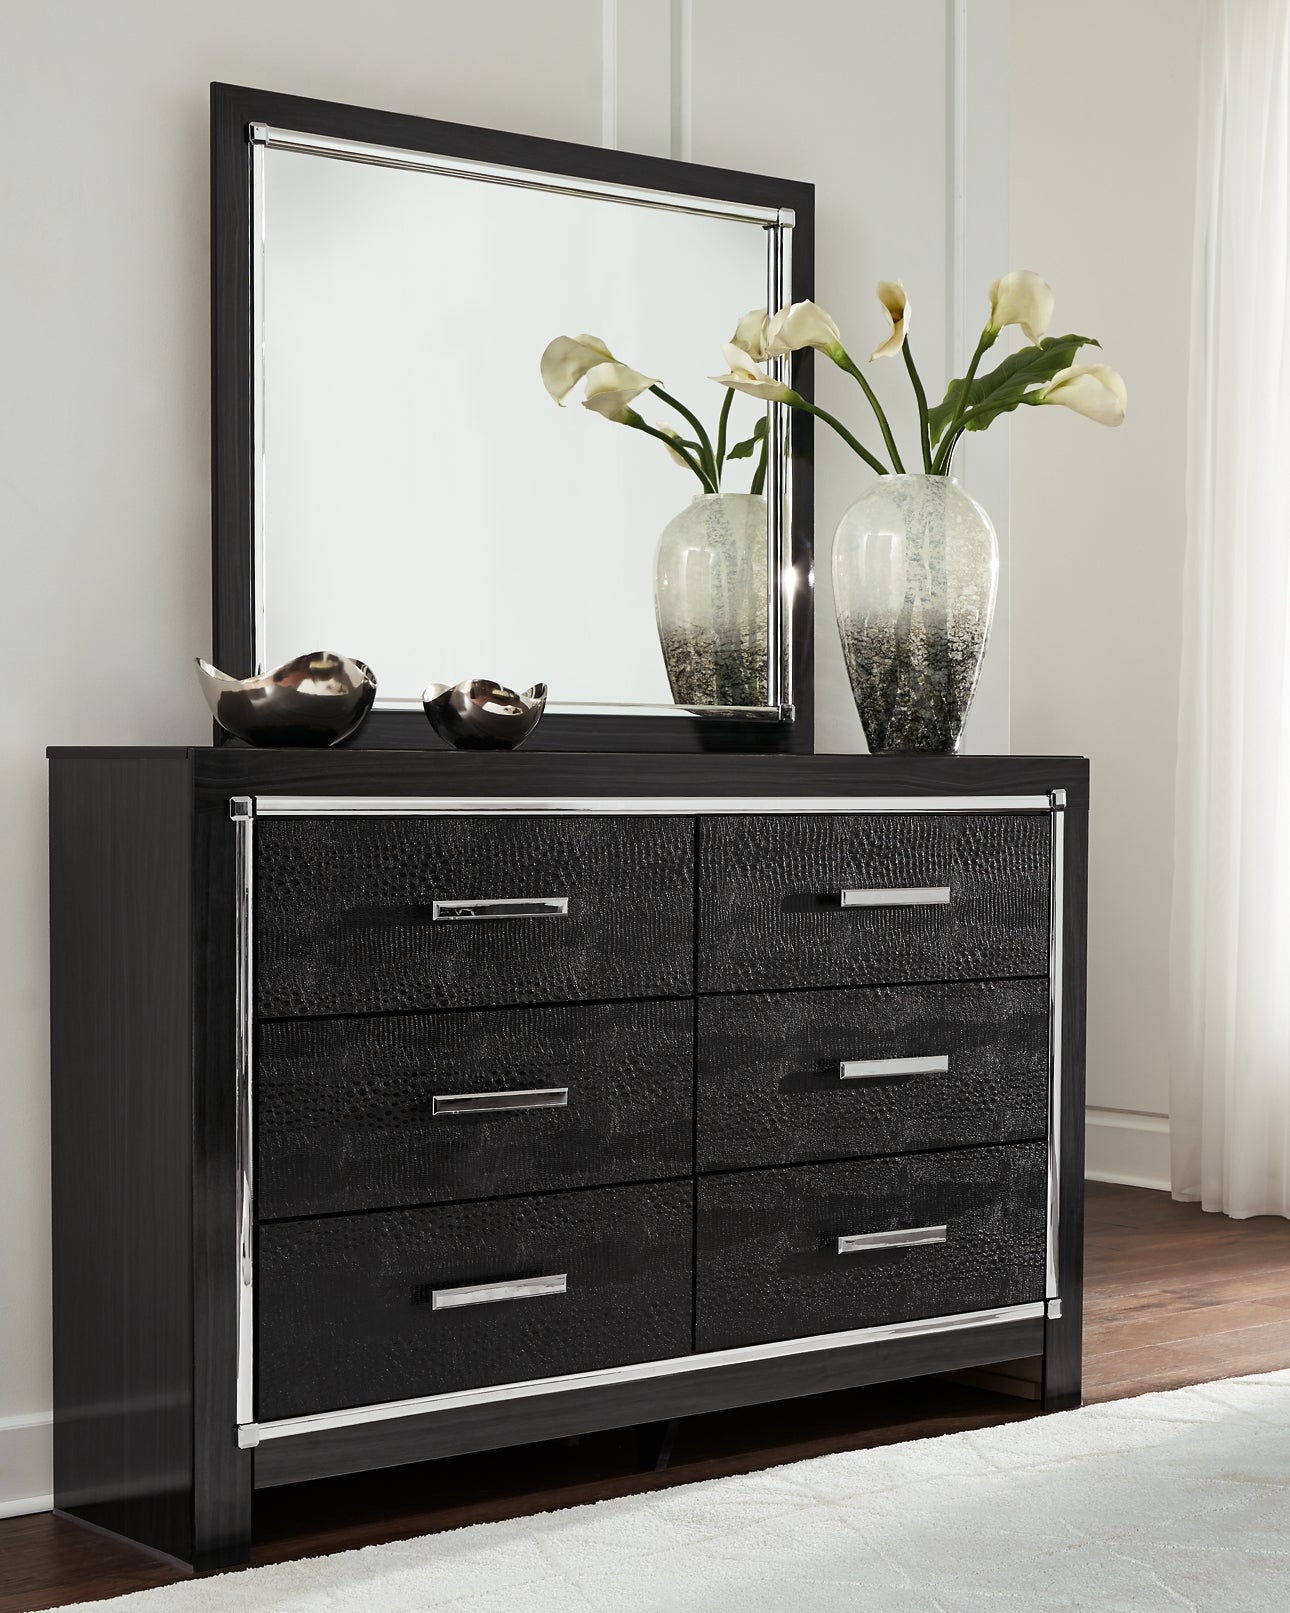 Kaydell King Upholstered Panel Headboard with Mirrored Dresser and Chest Wilson Furniture (OH)  in Bridgeport, Ohio. Serving Bridgeport, Yorkville, Bellaire, & Avondale